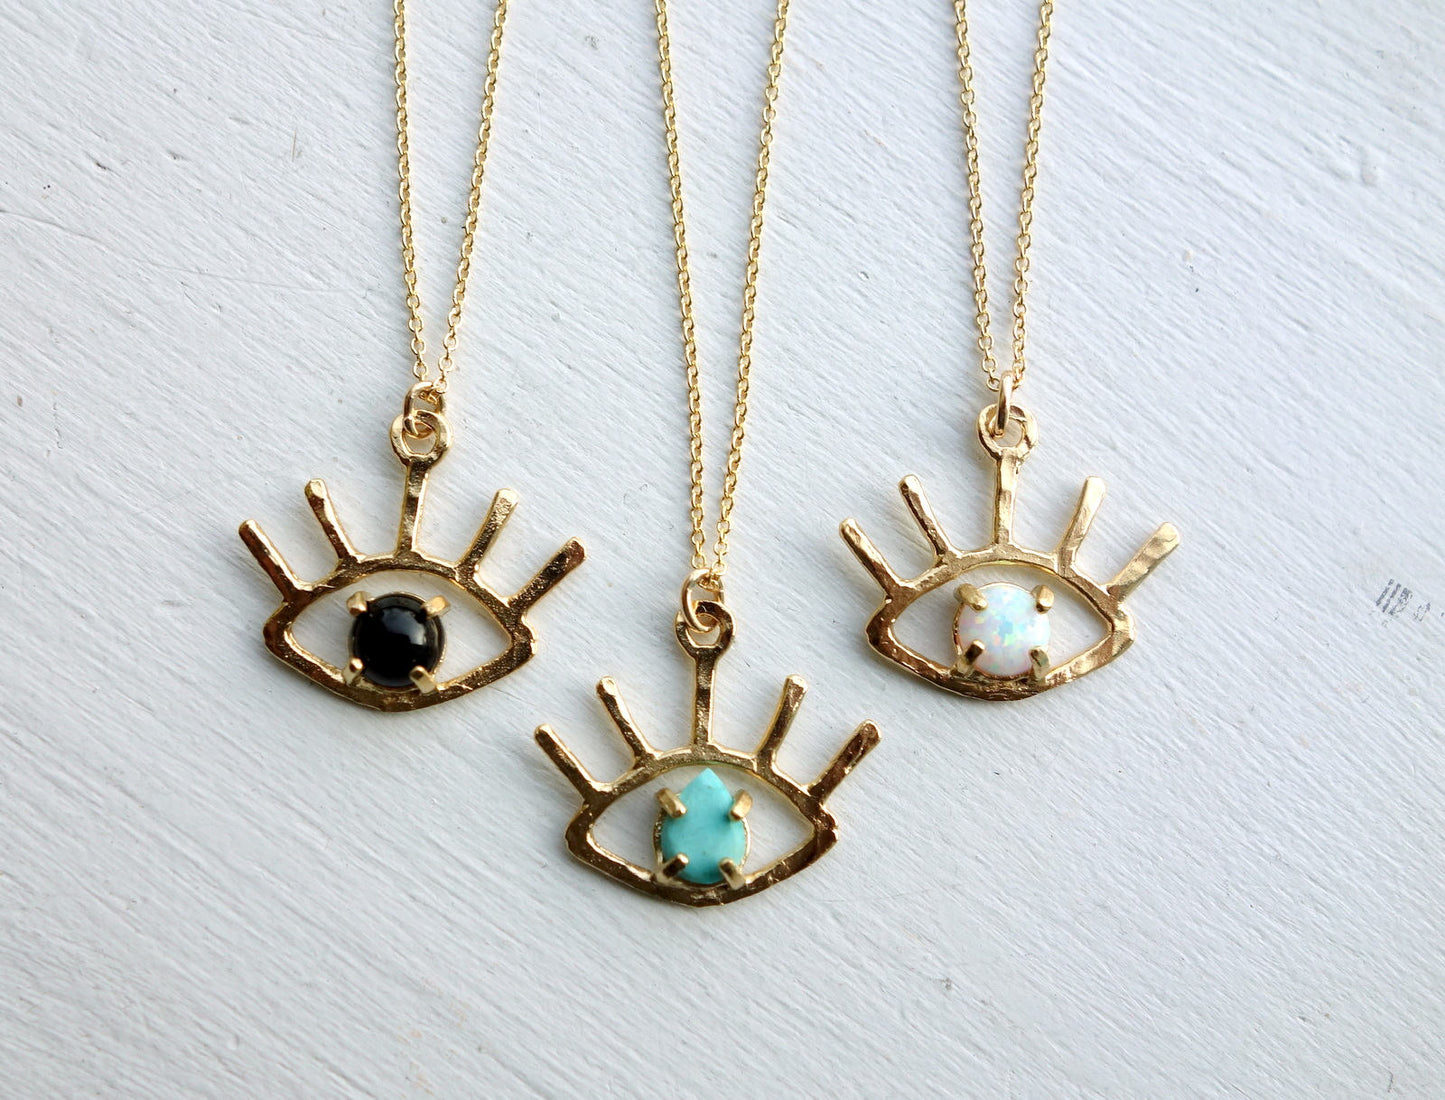 The Beholder - Eye Pendant in Gold with Onyx, Turquoise or Opal